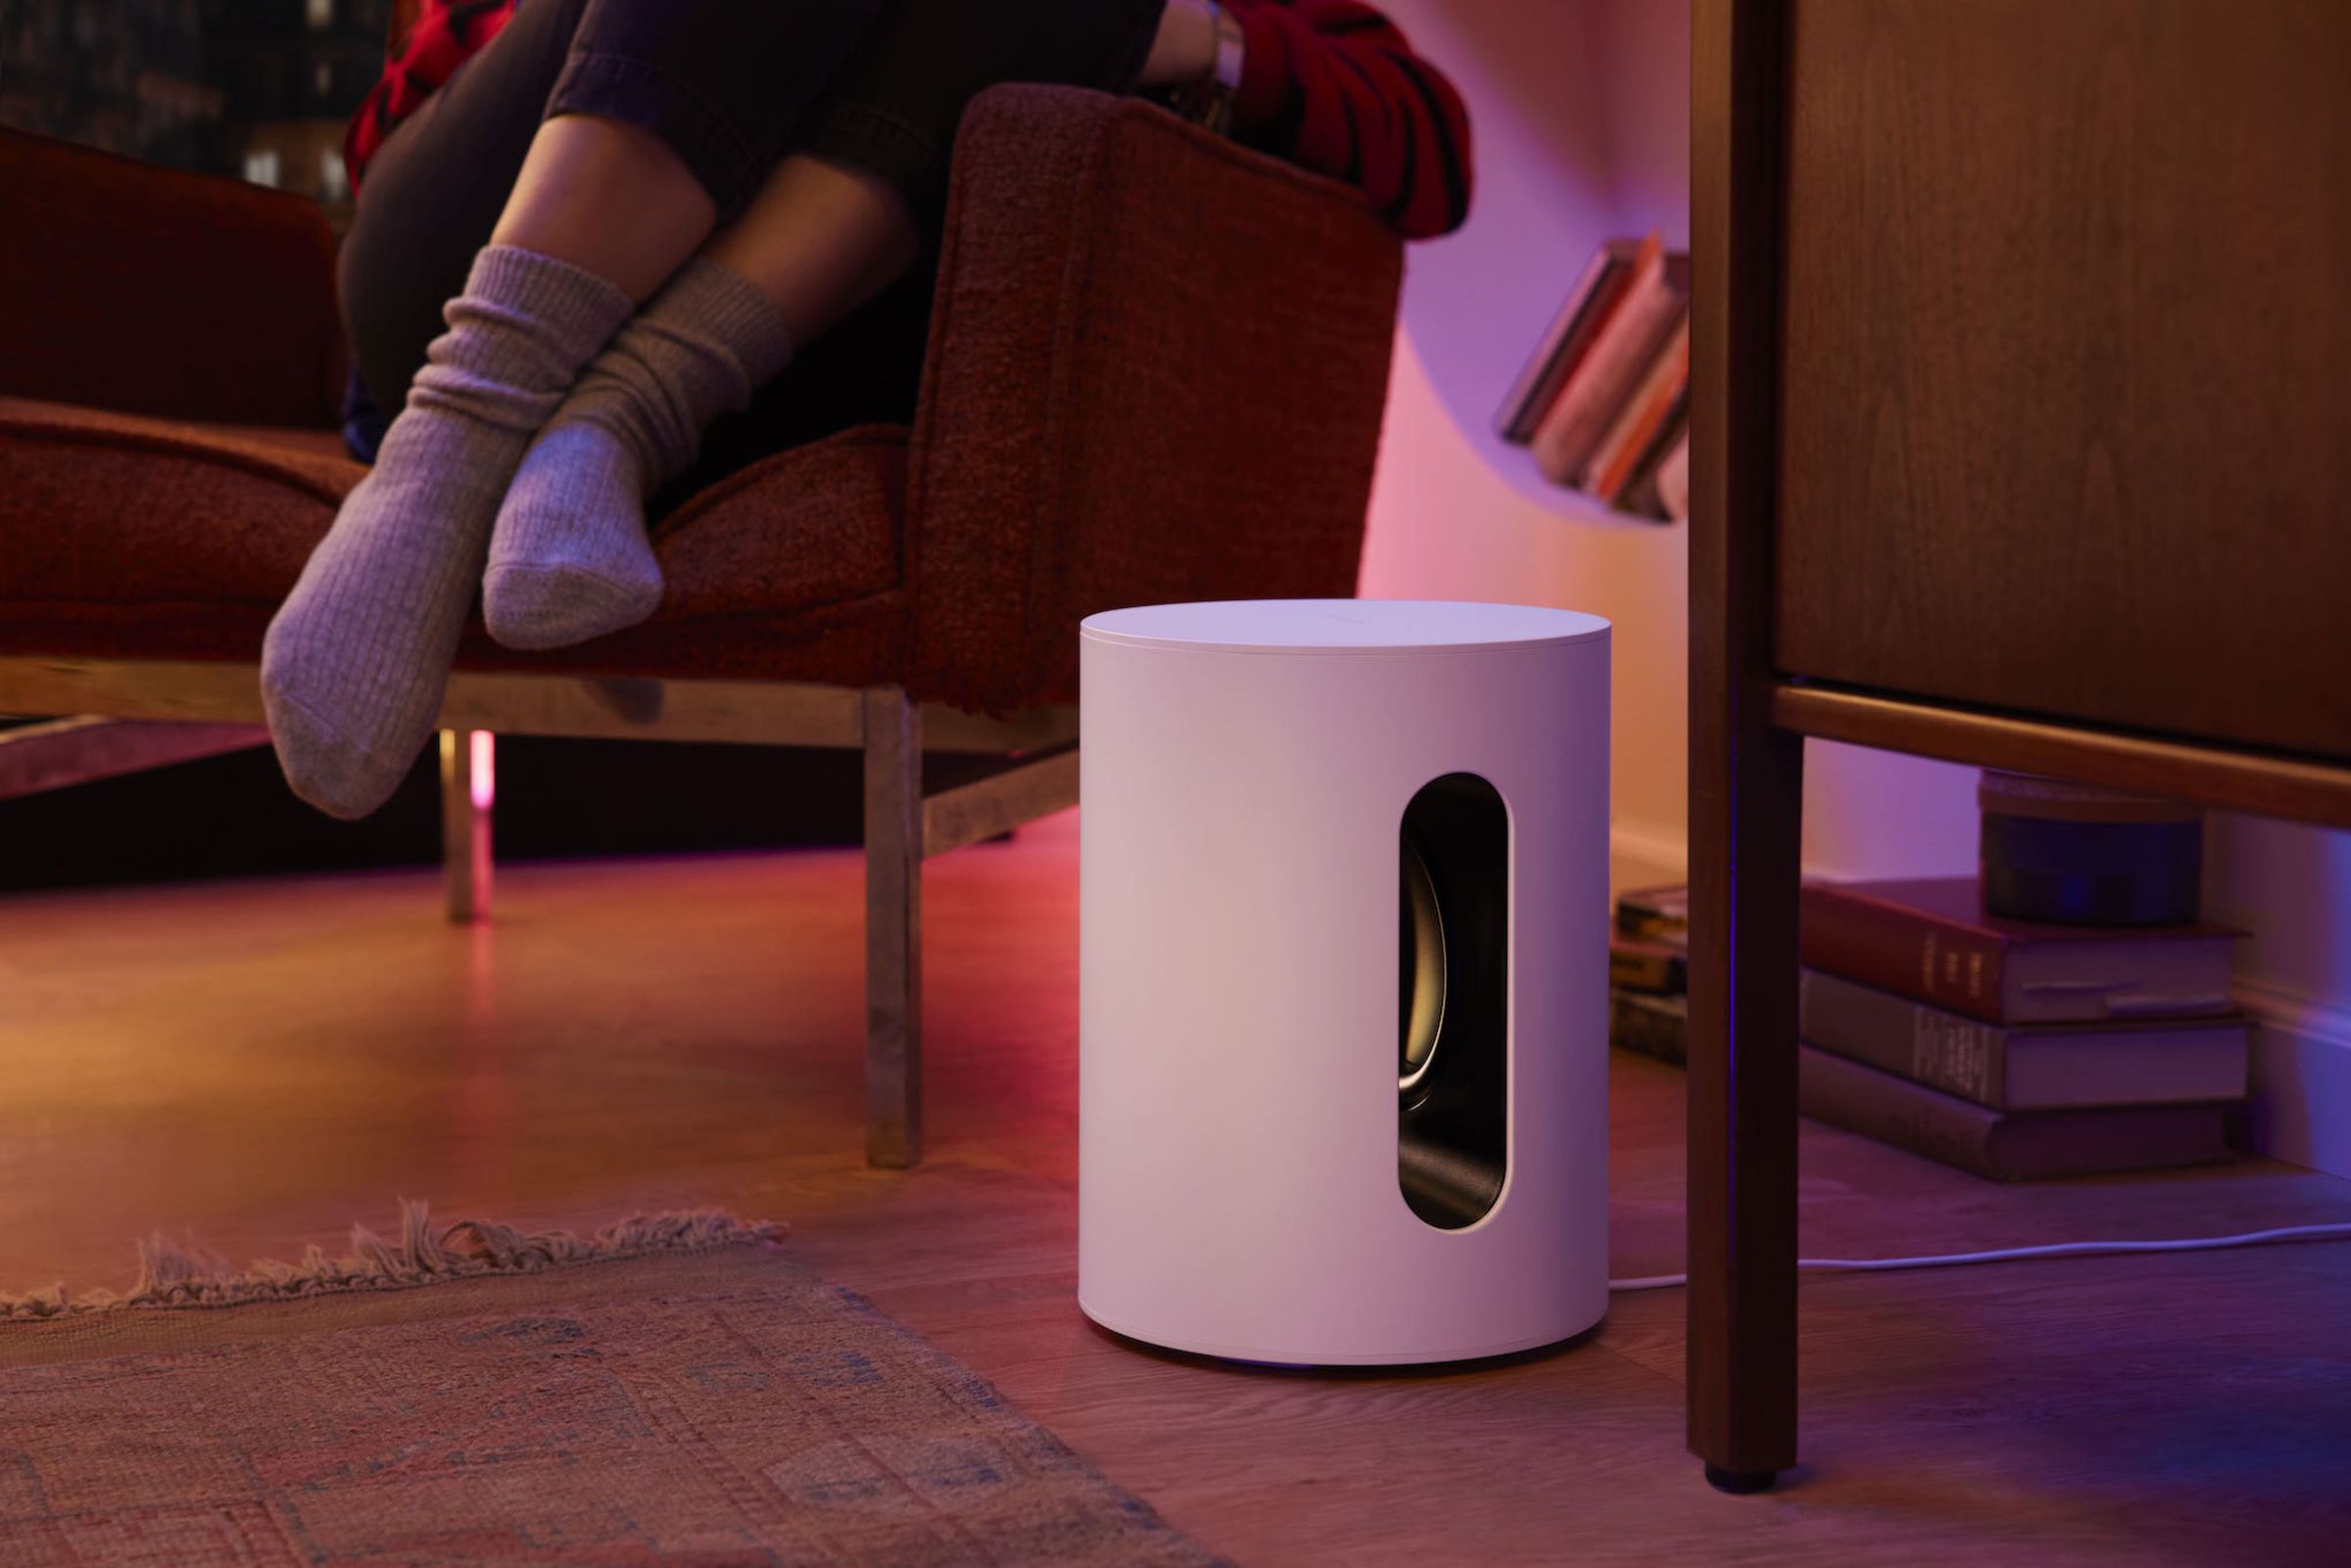 A Sonos Sub Mini subwoofer shown on the floor with someone sitting nearby.